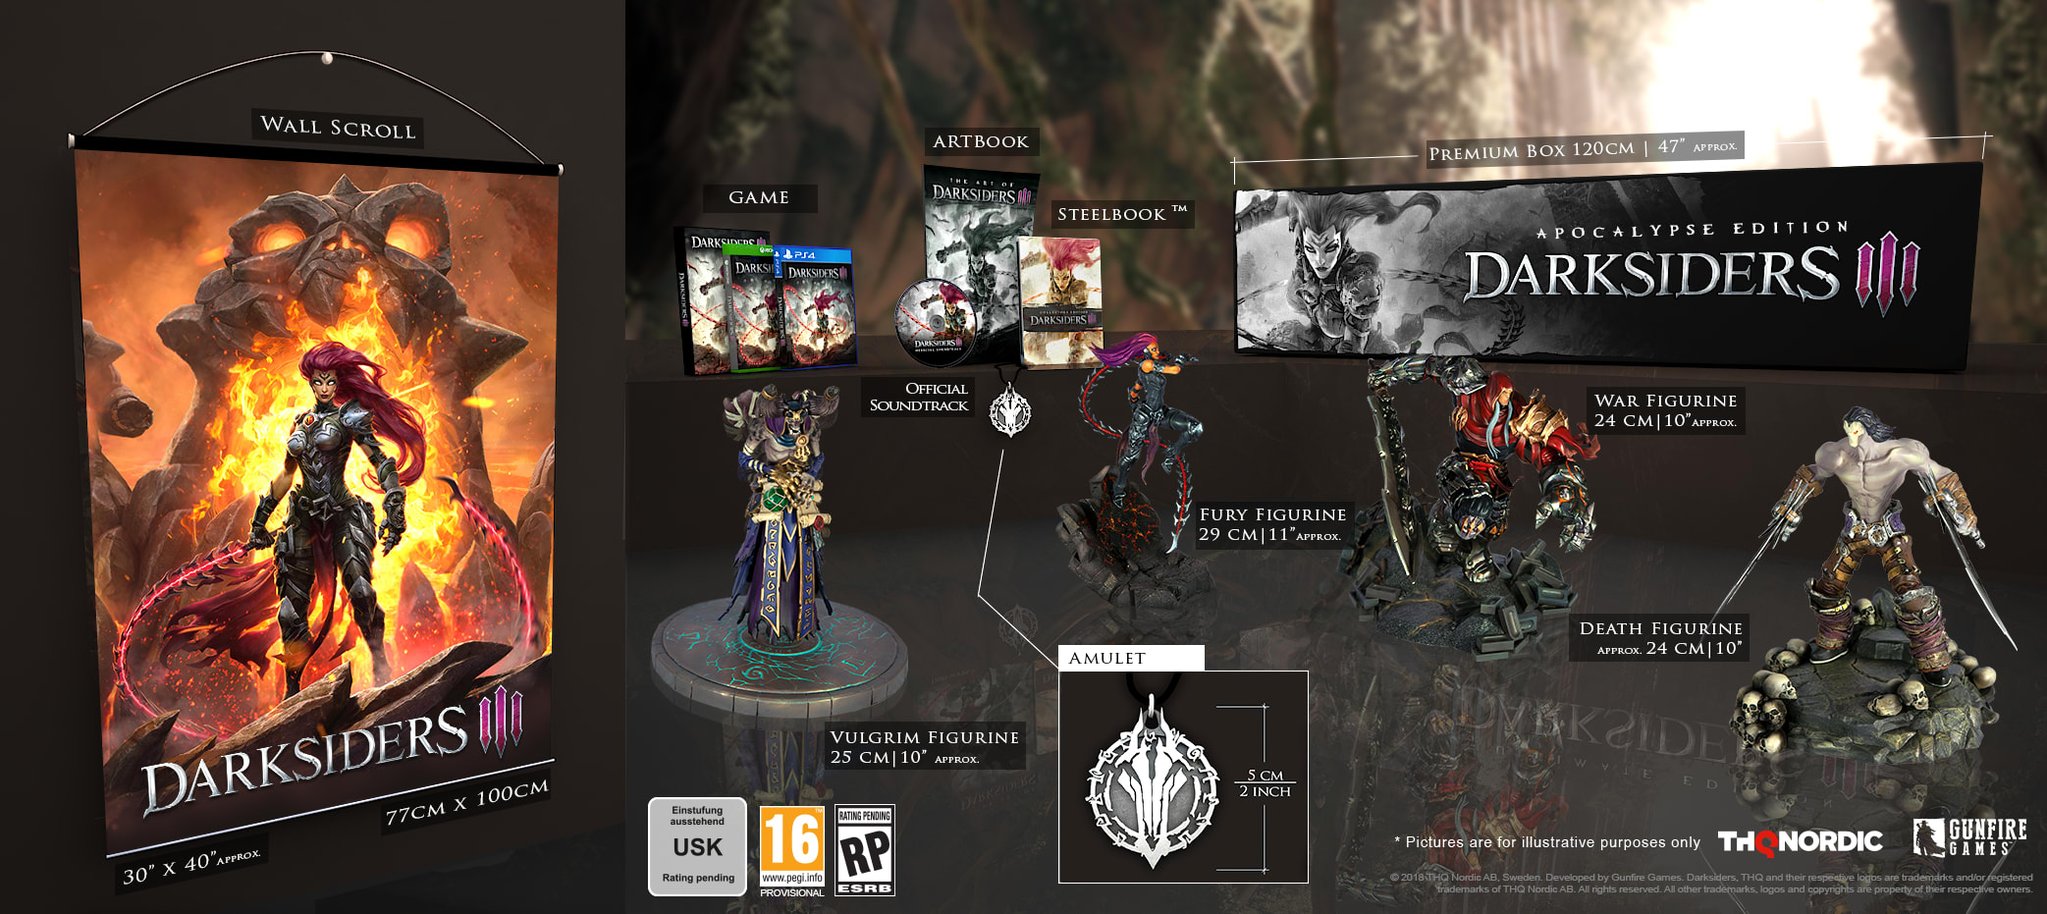 Darksiders Iii Special Editions Compared